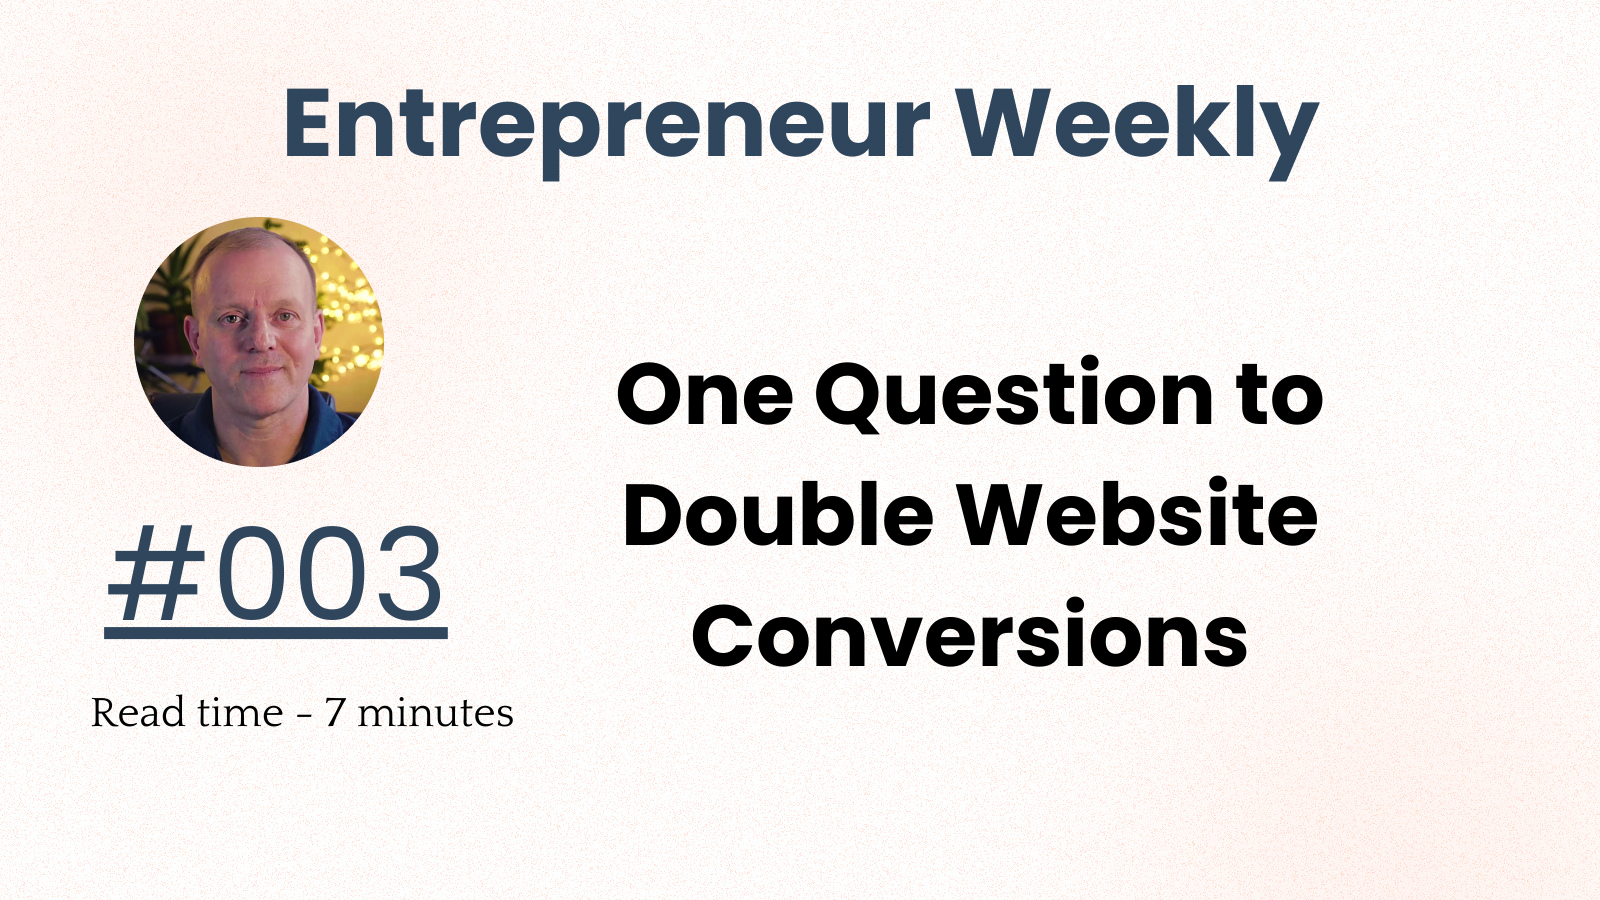 One Question to Double Website Conversions